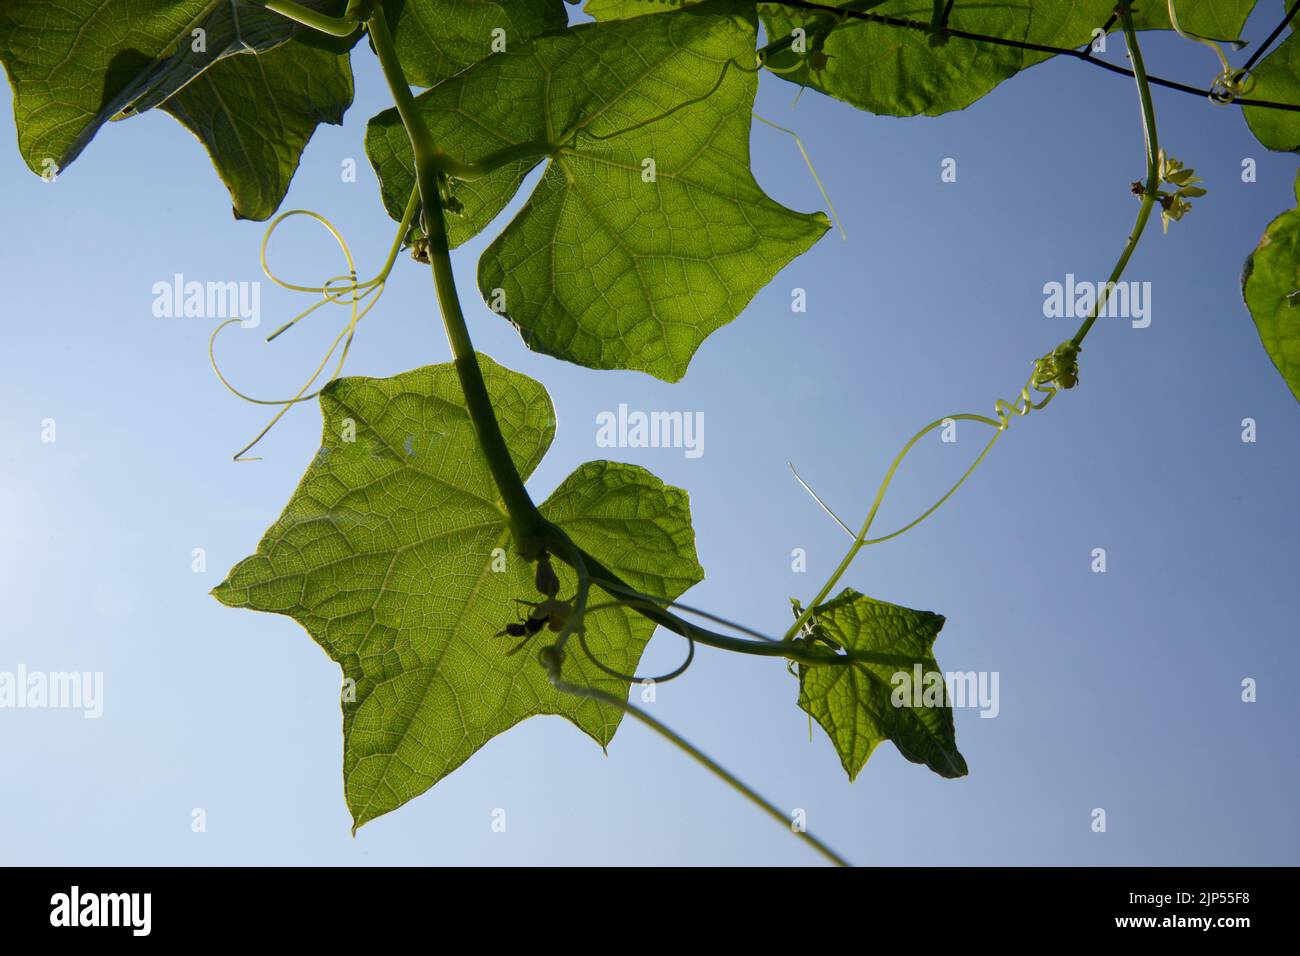 Leaves with tendrils of vines in the blue sky background Stock Photo